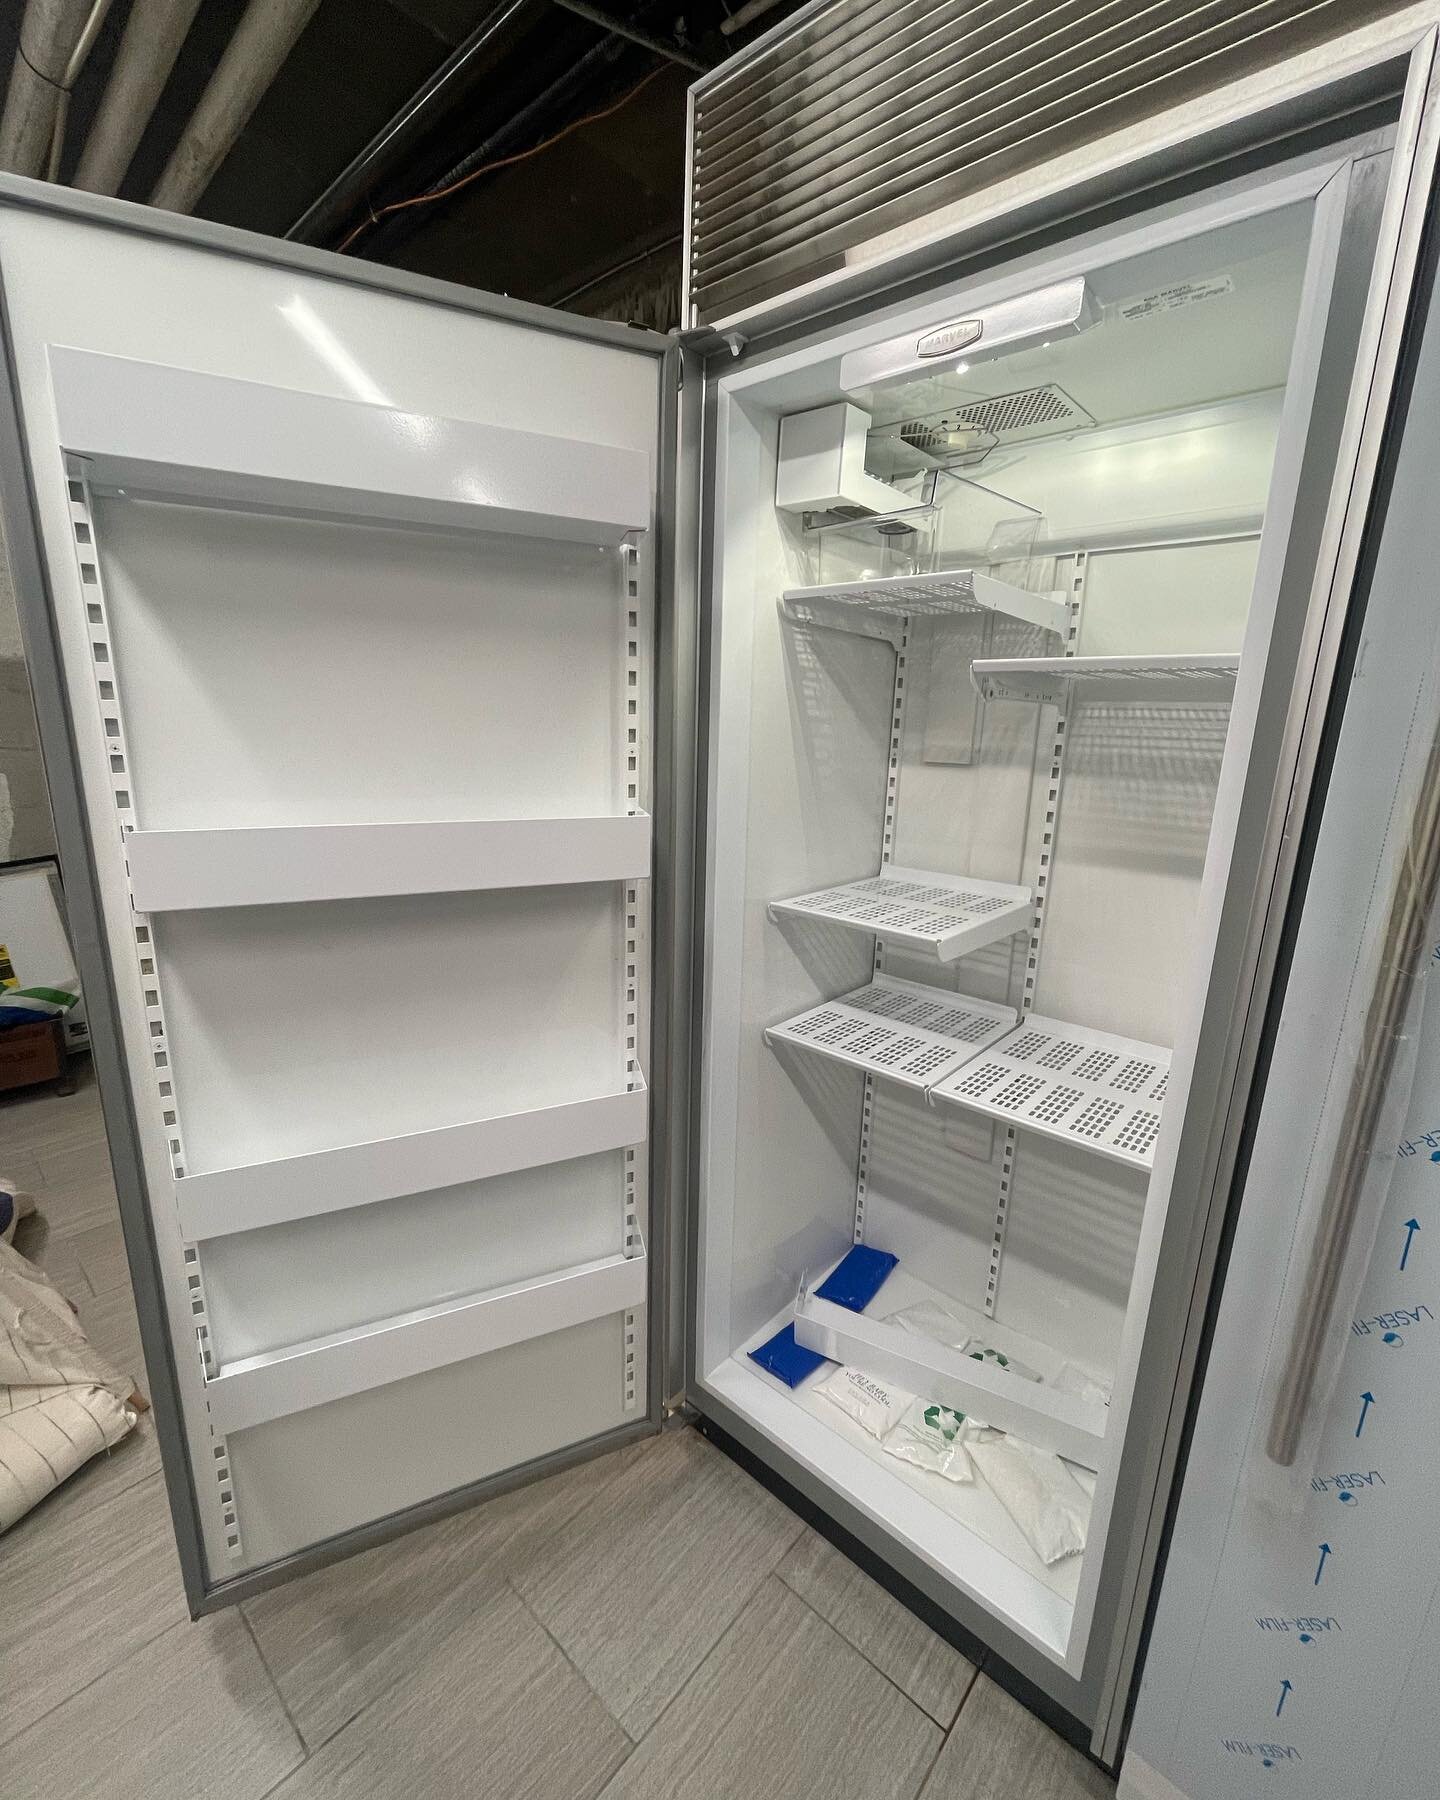 If ice build up in your fridge, just give us call, and we will fix it!